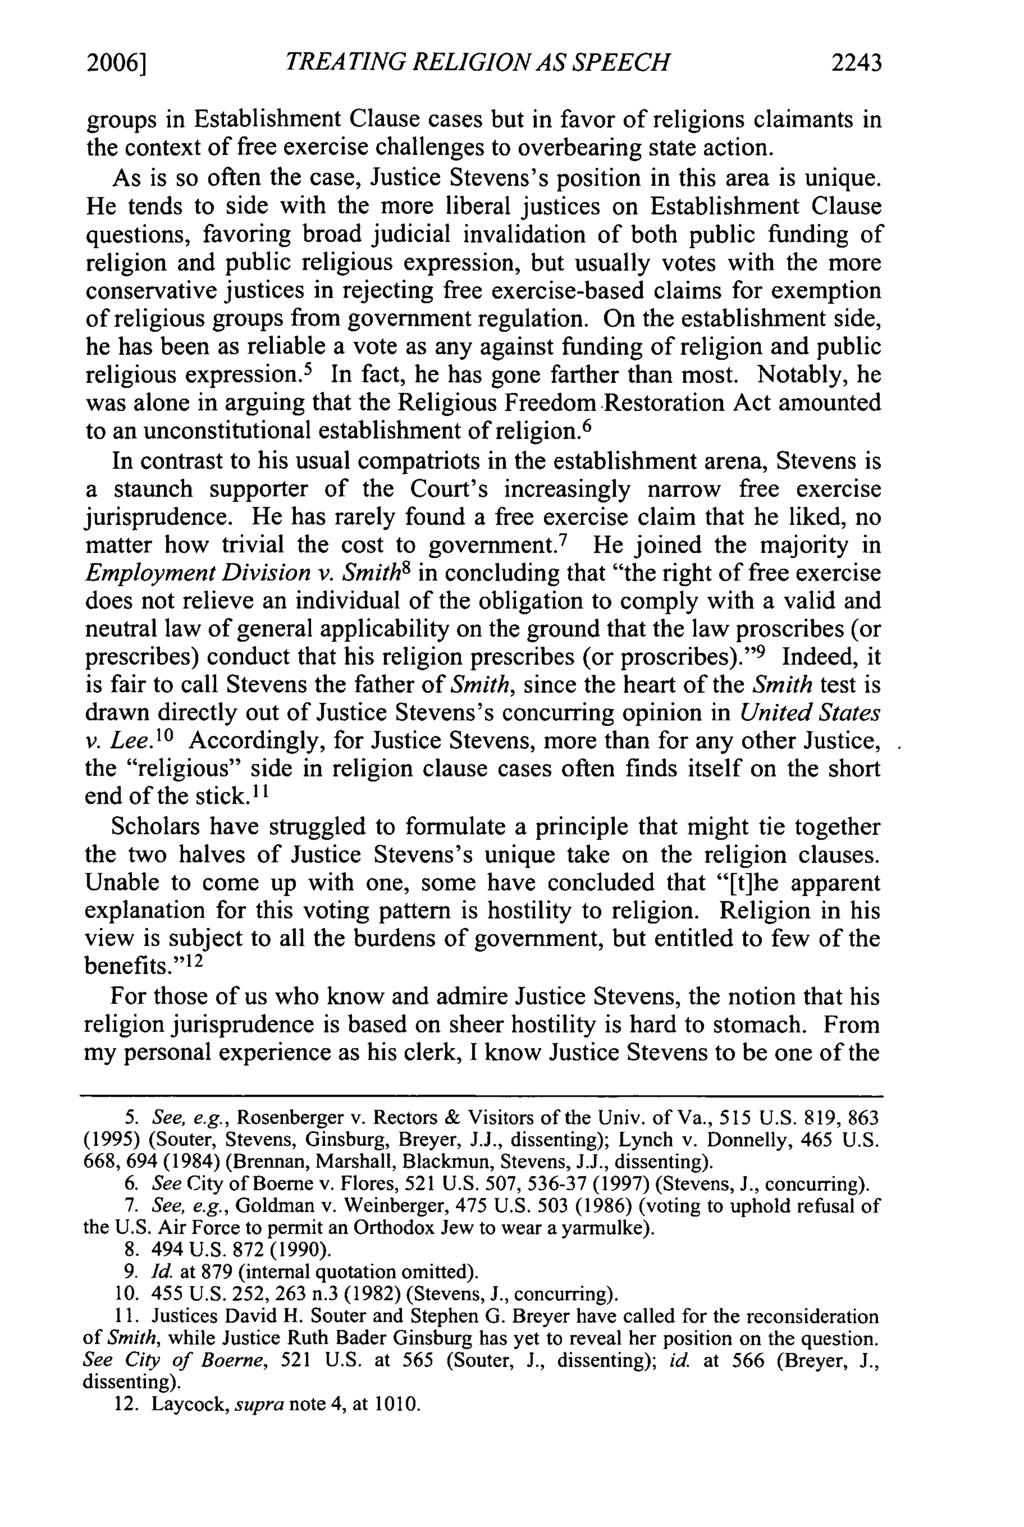 2006] TREA TING RELIGION AS SPEECH 2243 groups in Establishment Clause cases but in favor of religions claimants in the context of free exercise challenges to overbearing state action.